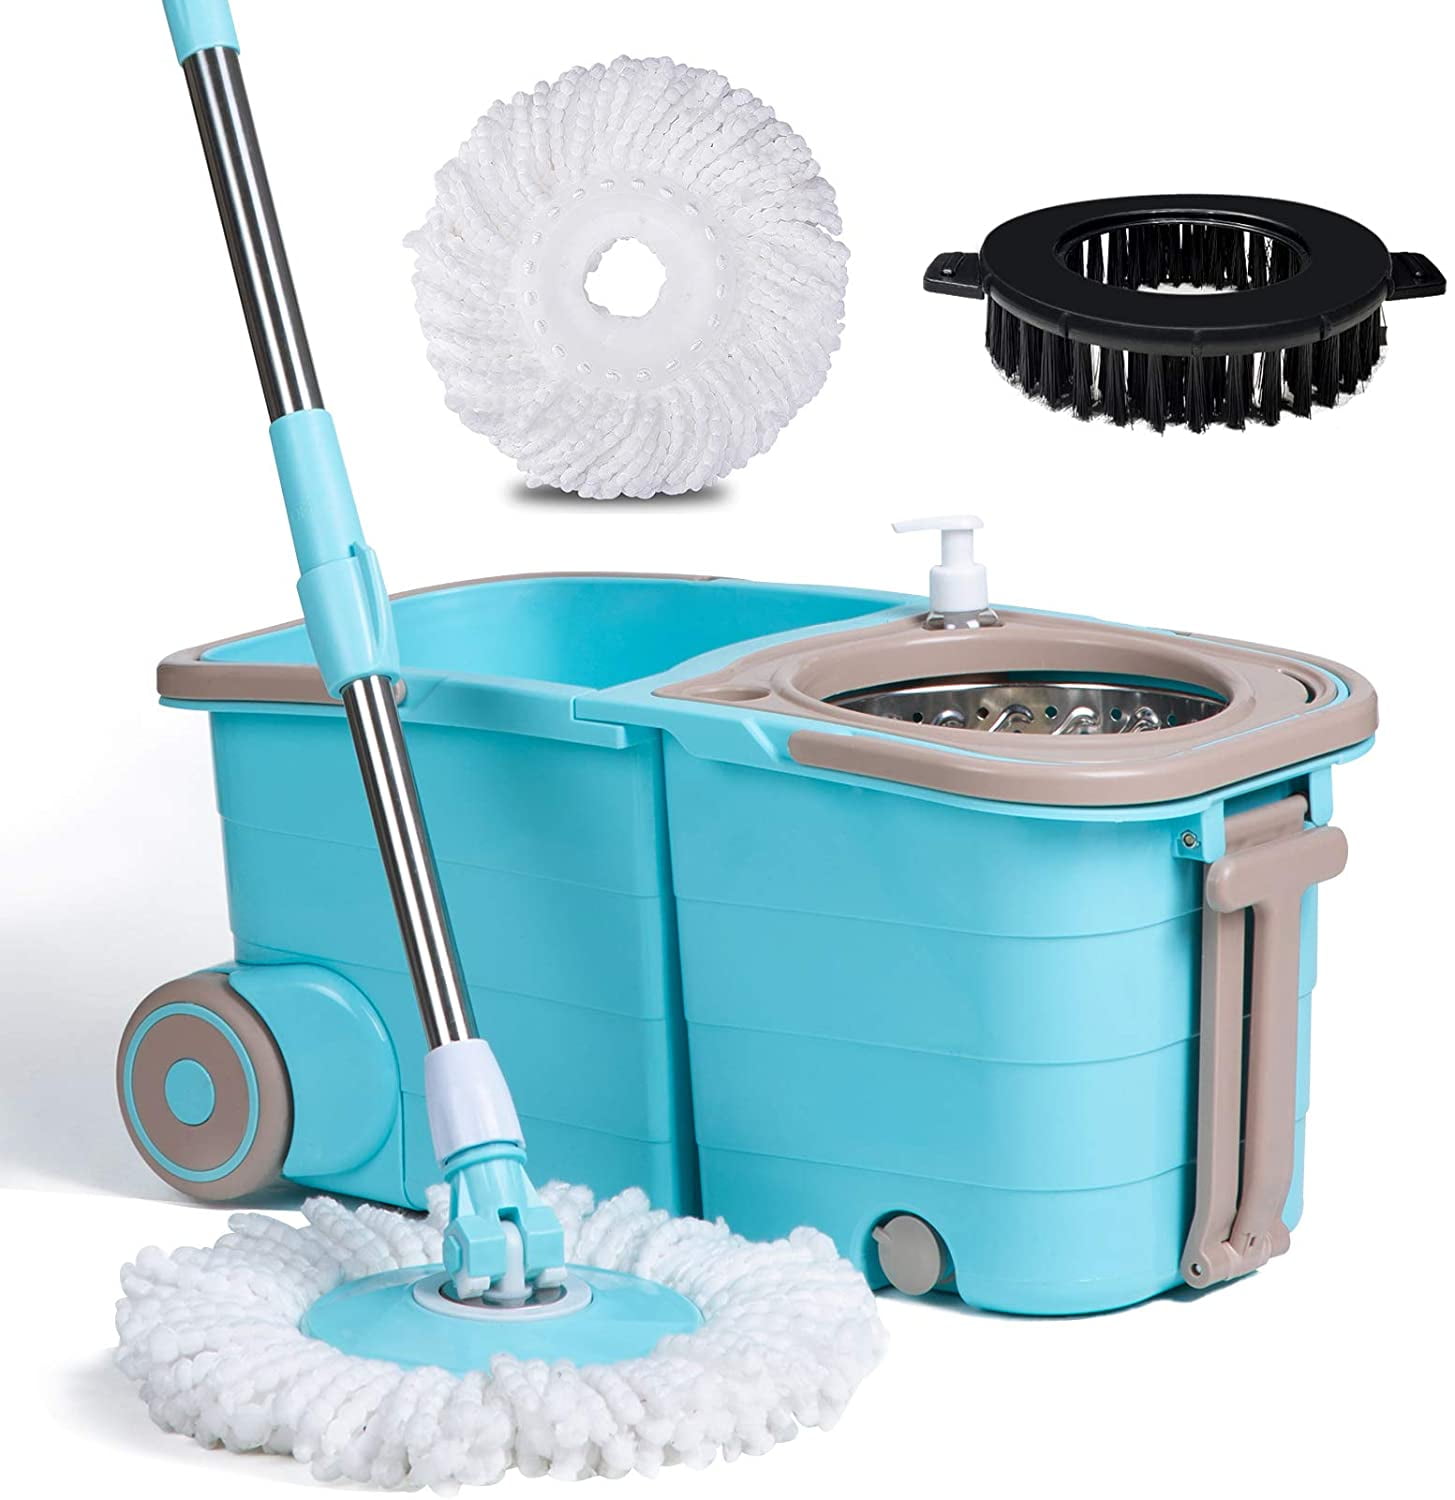 360 Spin Dry Basket with 2 Replacements Microfiber Mop Heads and Stainless Steel Adjustable Handle for Home Floor Cleaning Spin Mop Bucket with Wringer Mop and Bucket Set